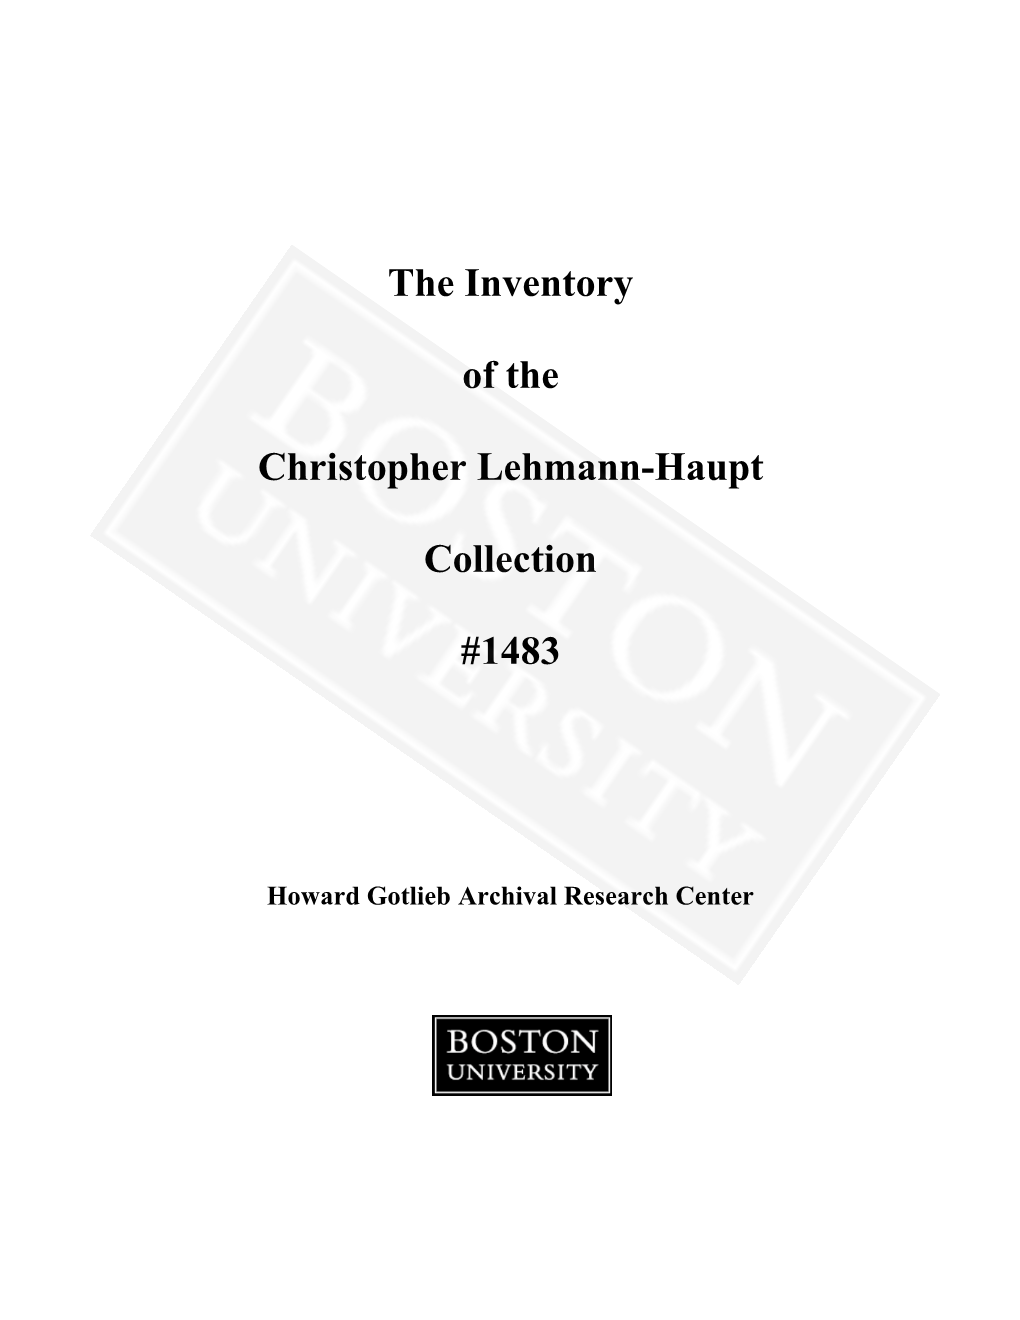 The Inventory of the Christopher Lehmann-Haupt Collection #1483